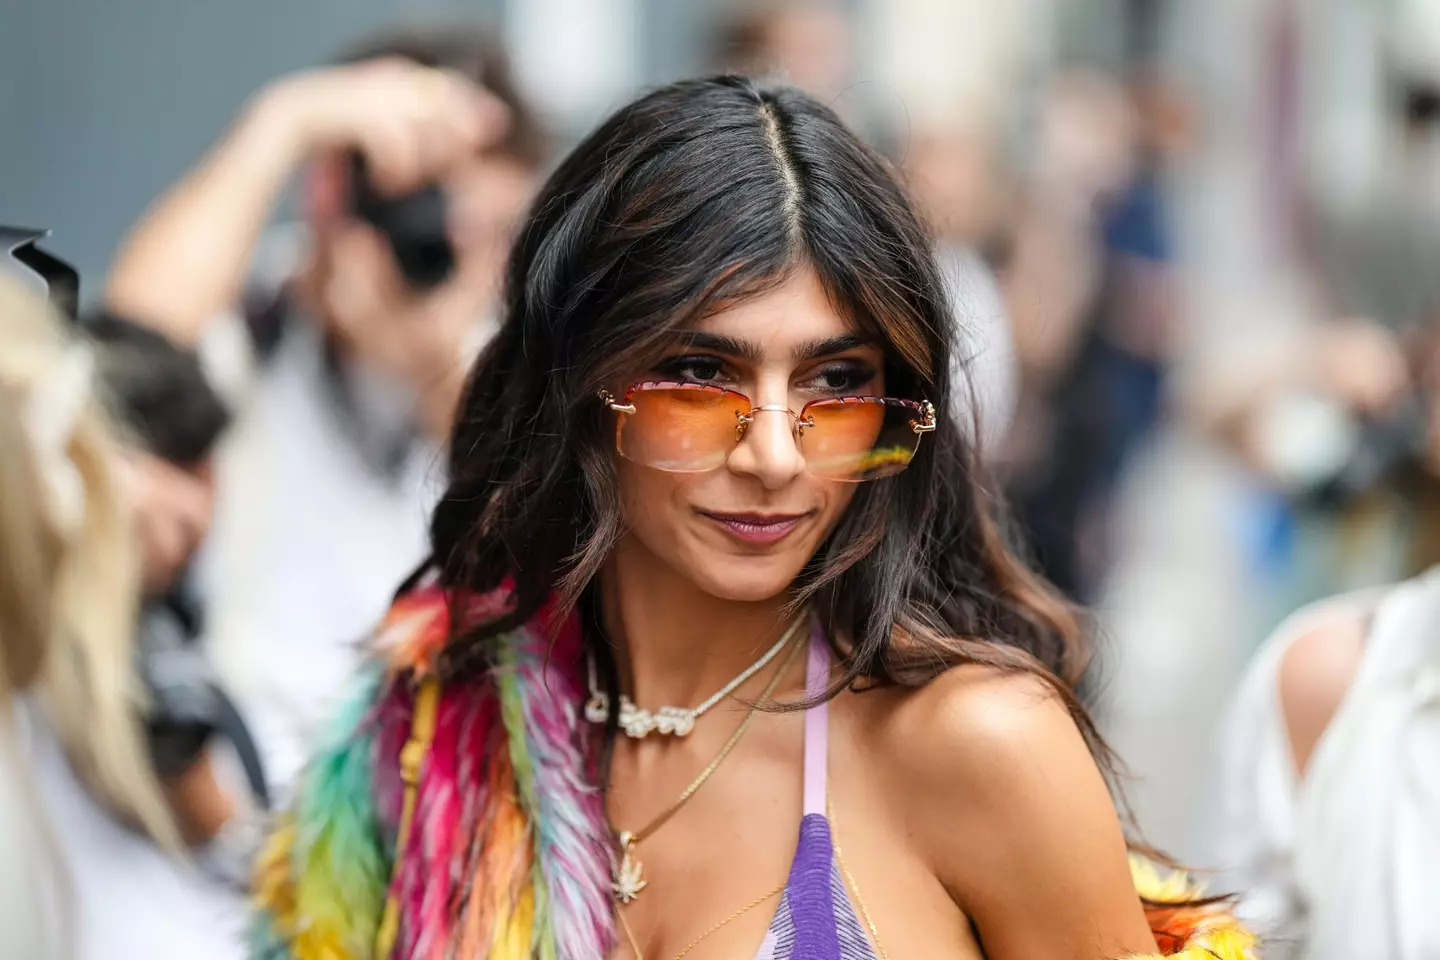 Mia Khalifa quit the industry in 2015. (Edward Berthelot/Getty Images)